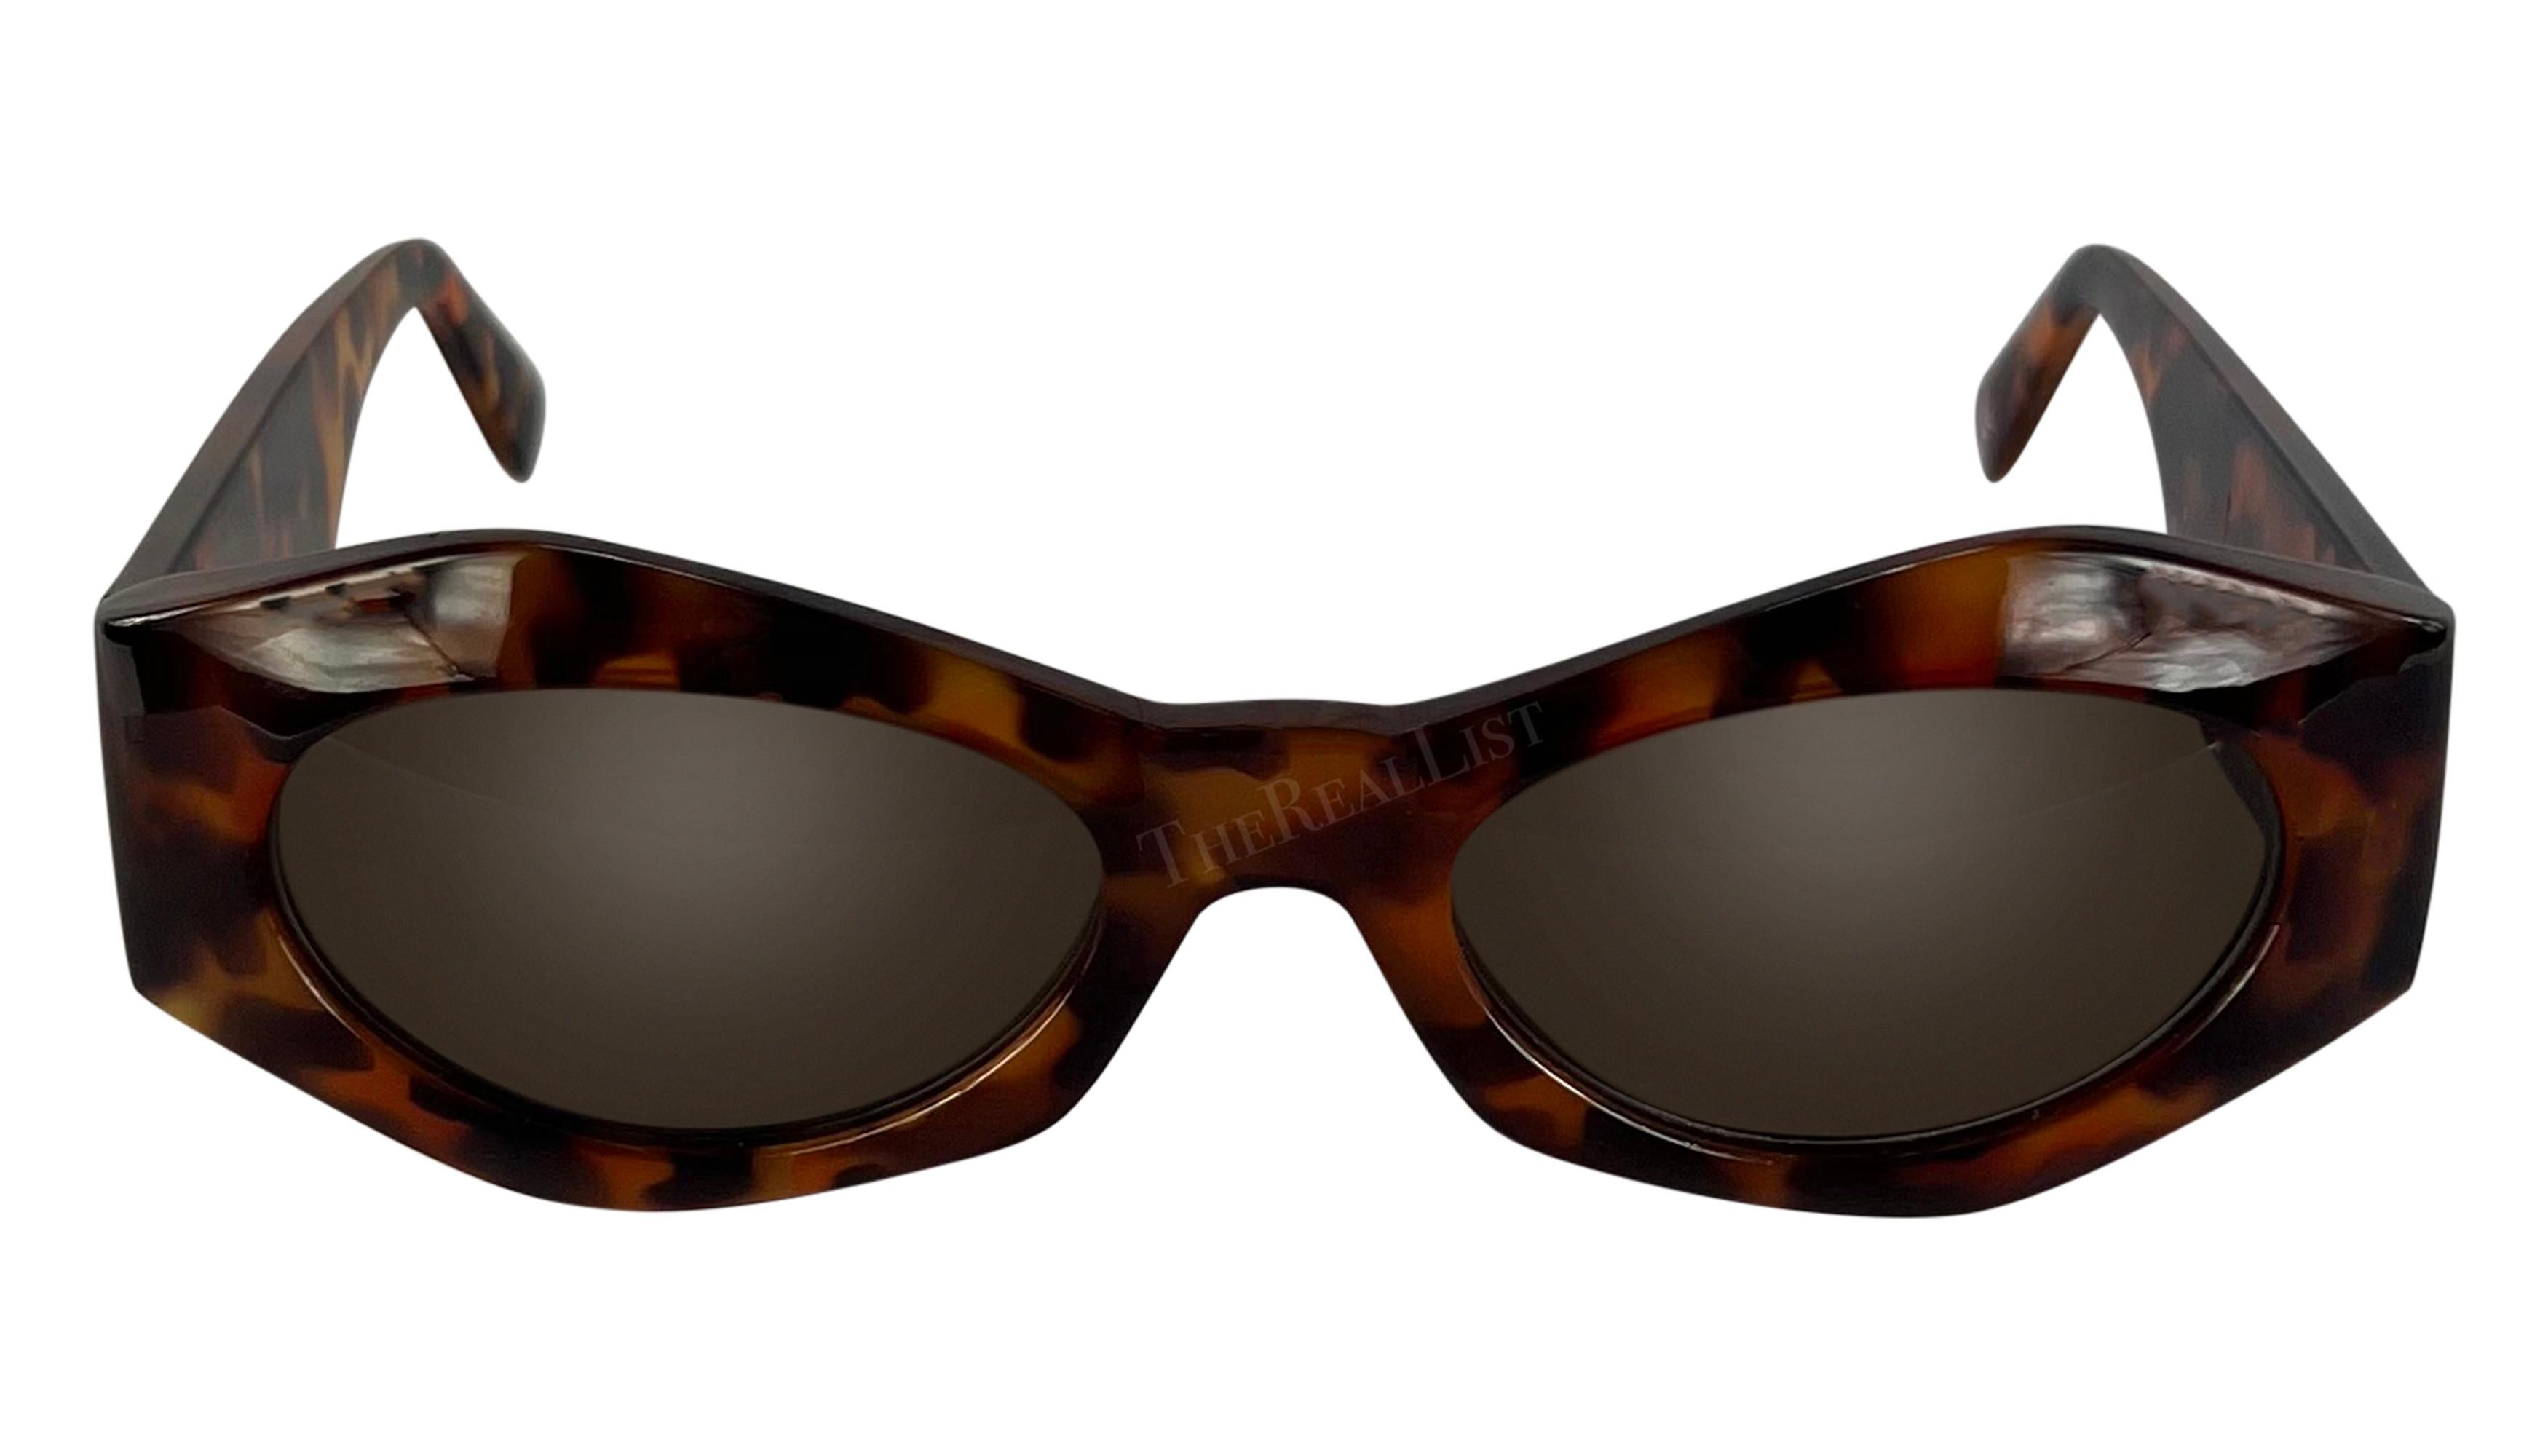 Designed by Gianni Versace in the 1990s, these angular faux-tortoise shell sunglasses are an ultra-chic addition to any wardrobe. Their sleek angular shape is accentuated by iconic gold-tone Versace Medusa relief adorning each arm. 

Approximate